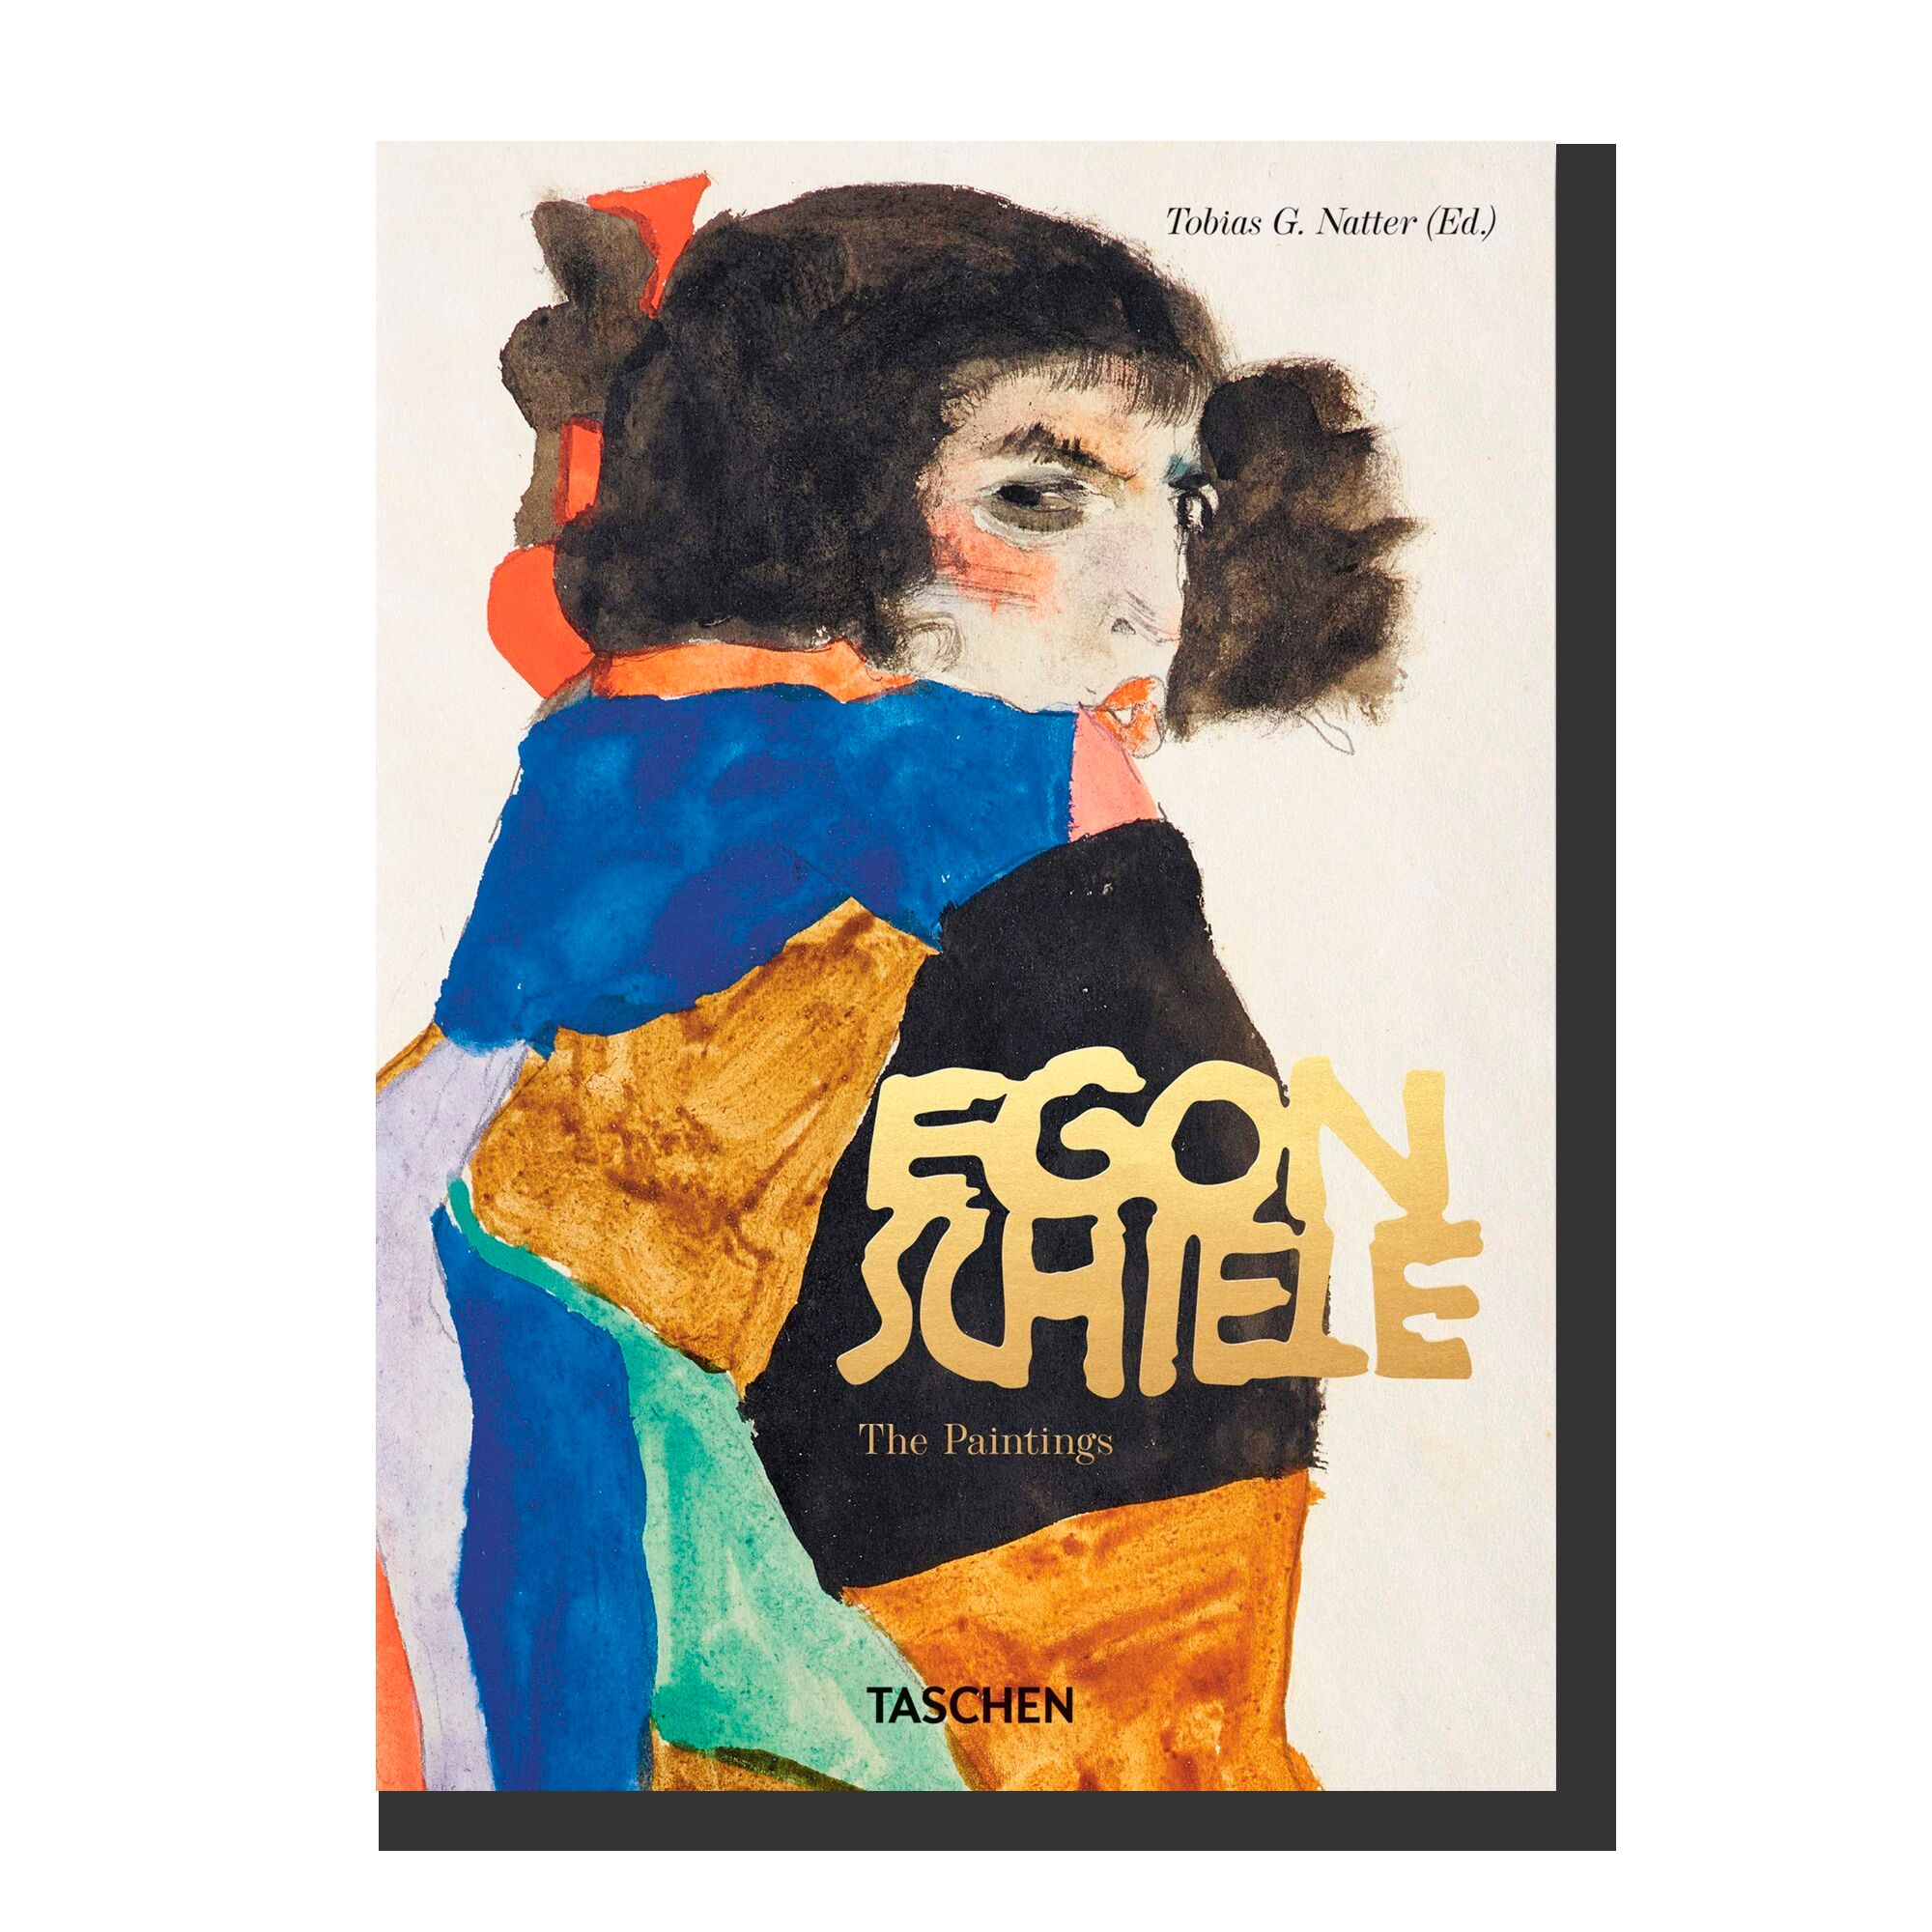 Egon Schiele. The Paintings  (40th Anniversary Edition)